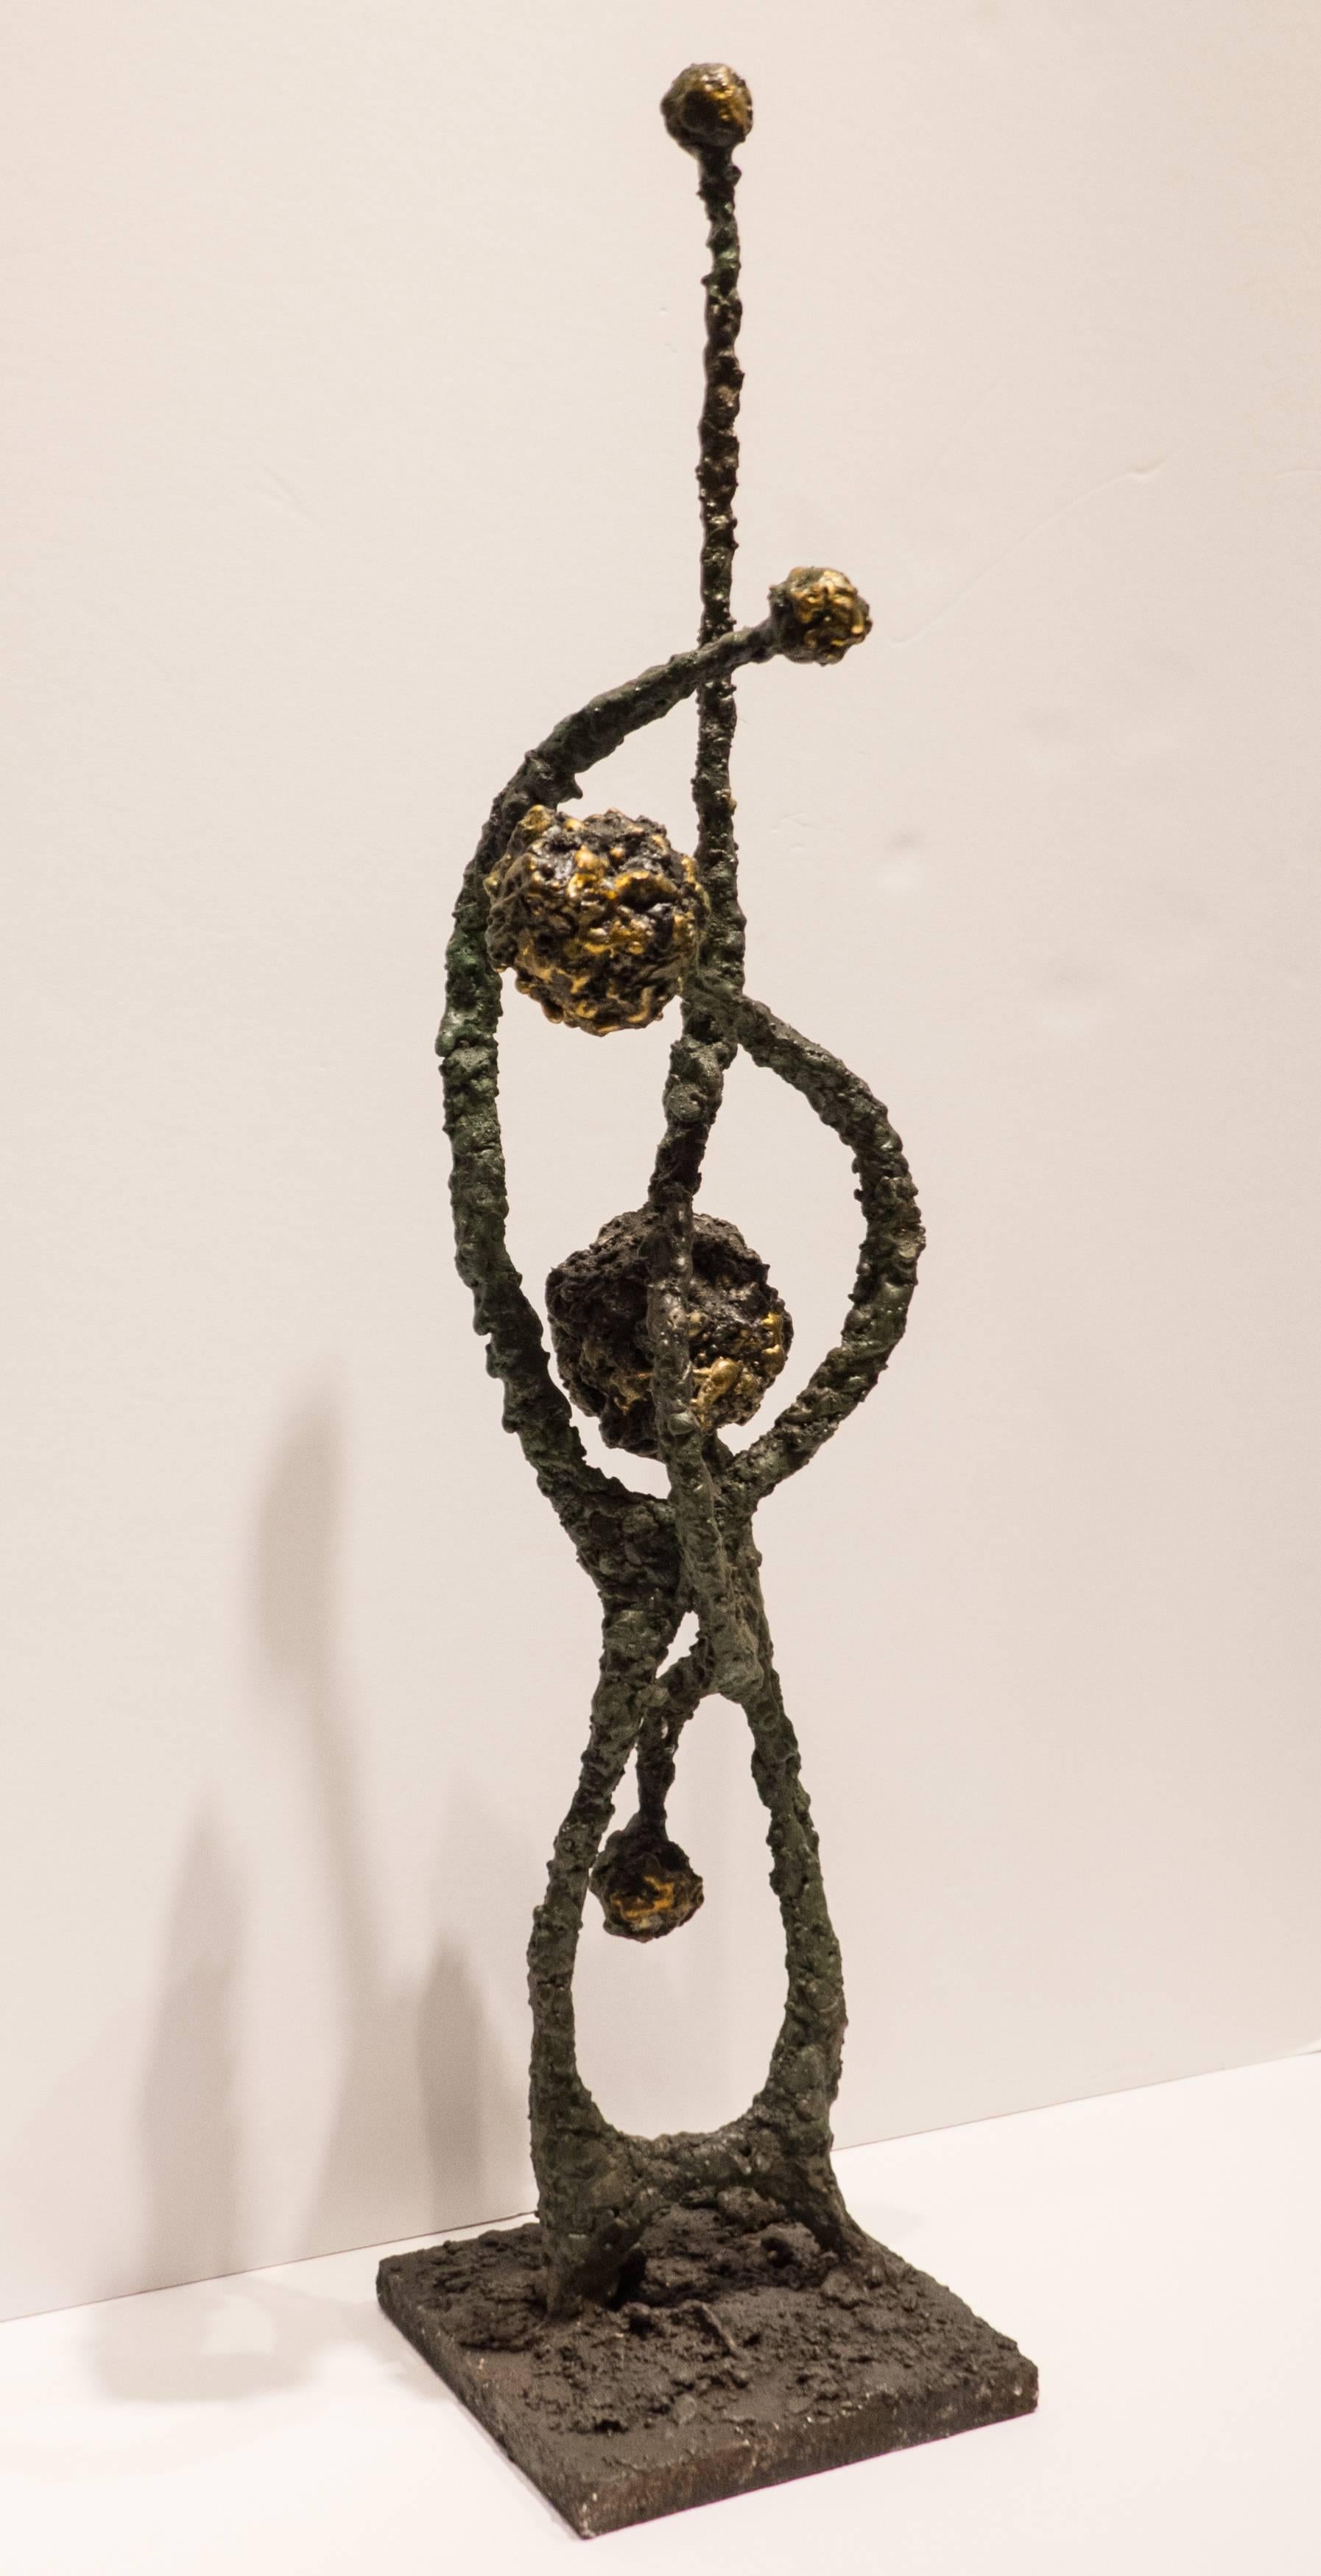 Brutalist sculpture of patinated steel and fused bronze, with a sinuously abstract botanical aspect, titled 